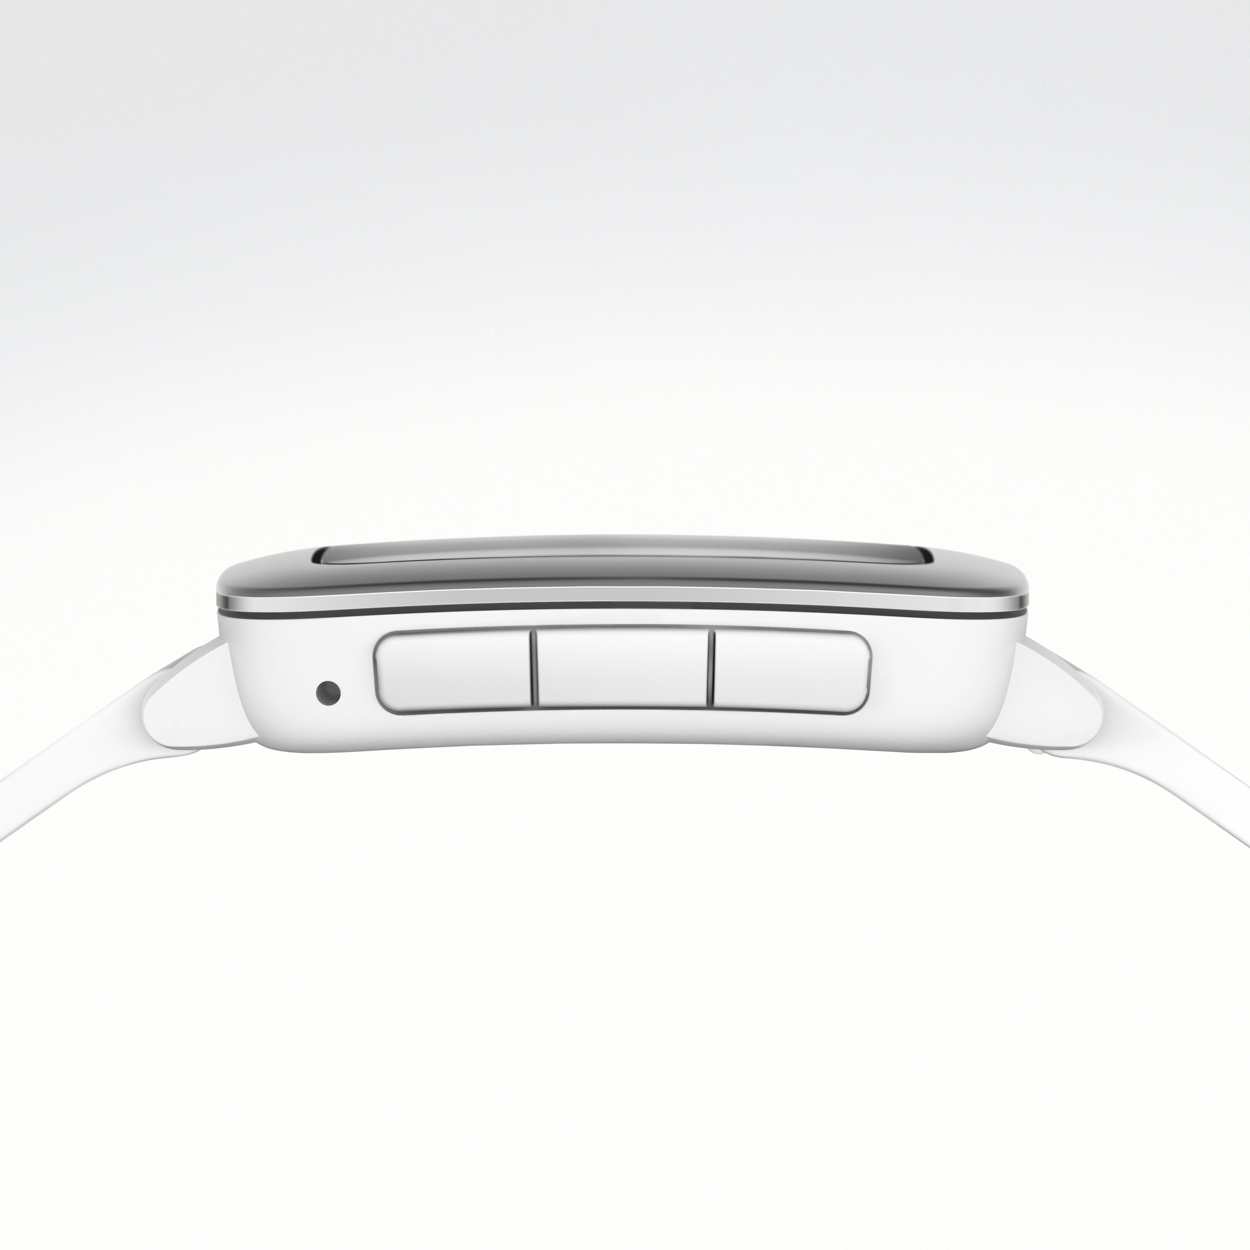 Pebble Time Blanche